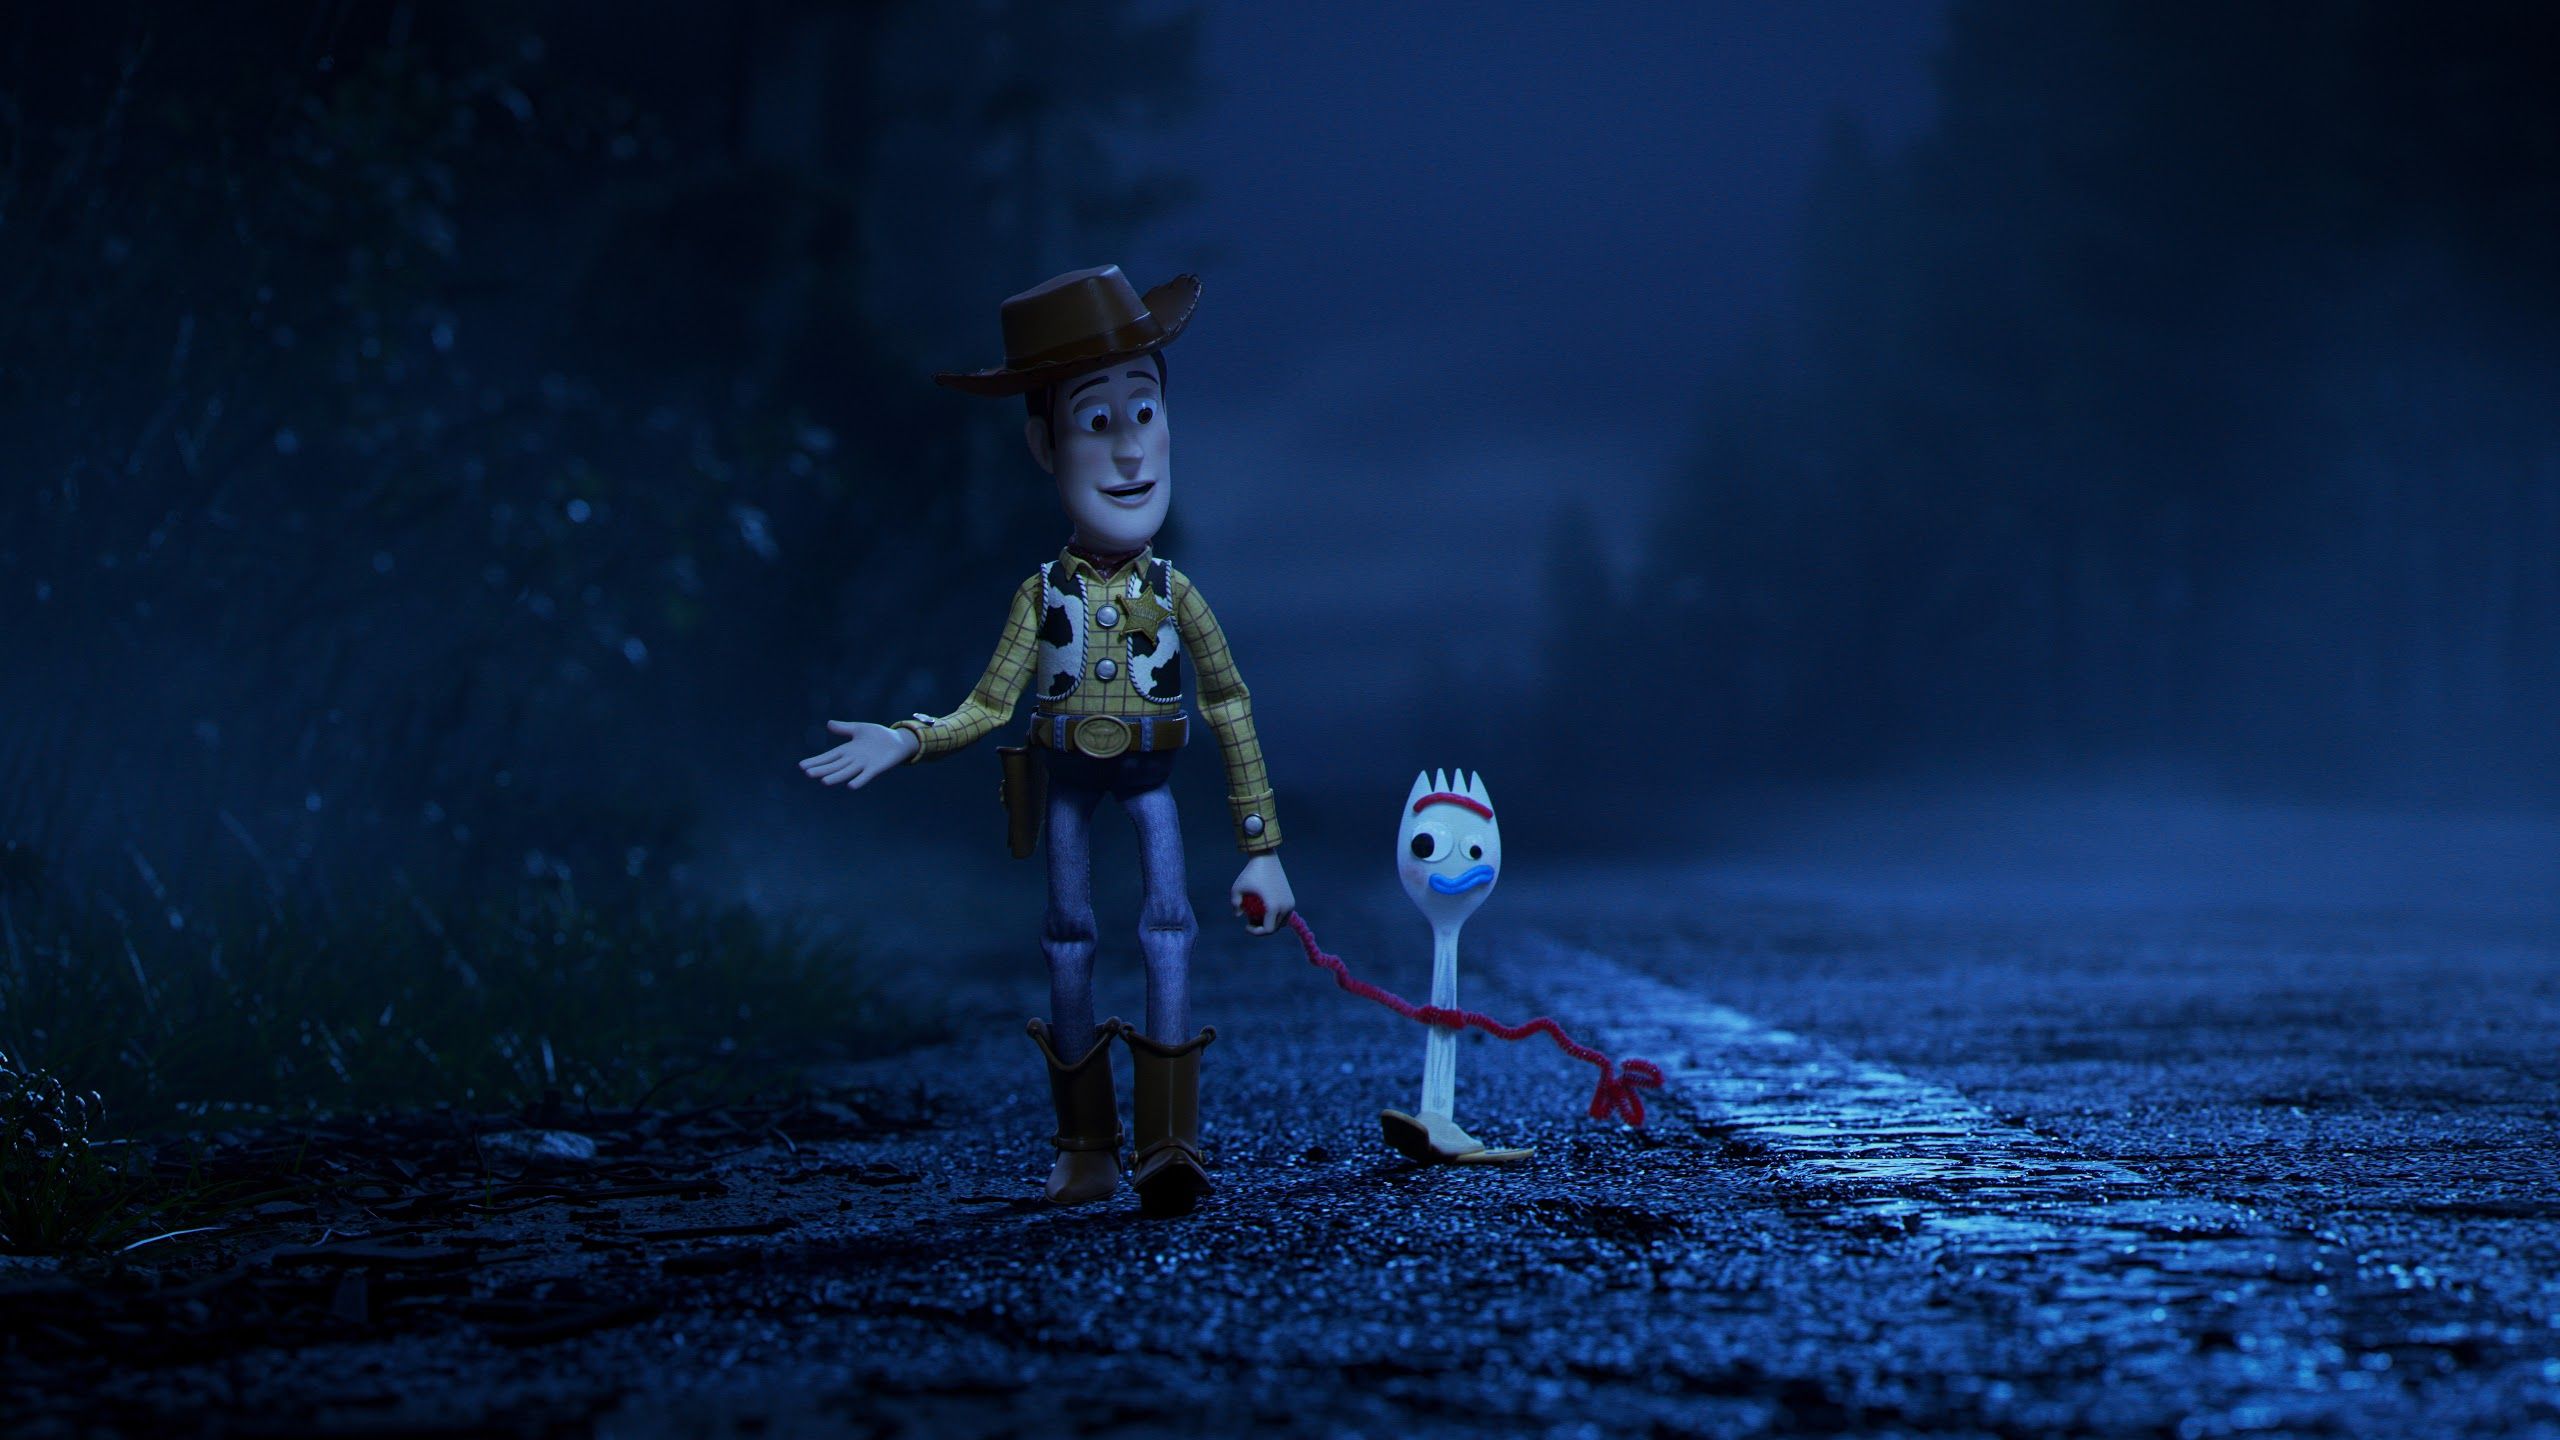 Toy Story 4 Woody and Forky 8K Wallpaper